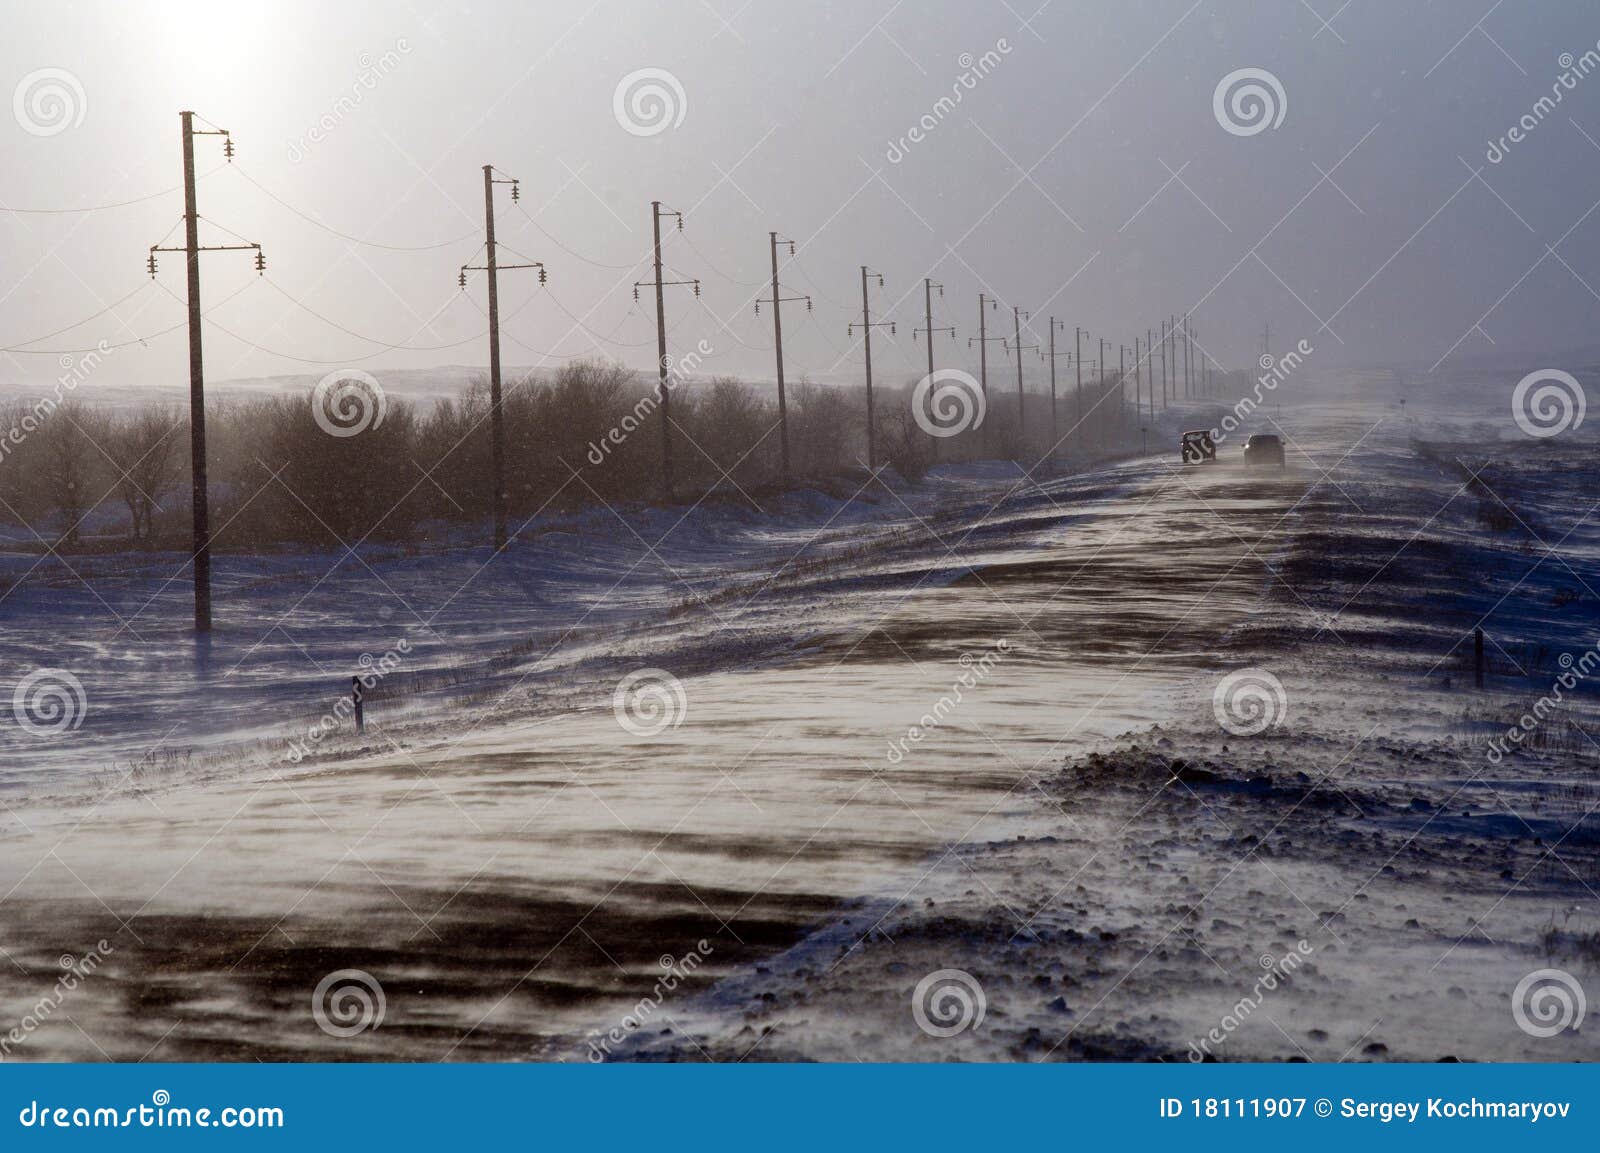 winter driving clipart - photo #43